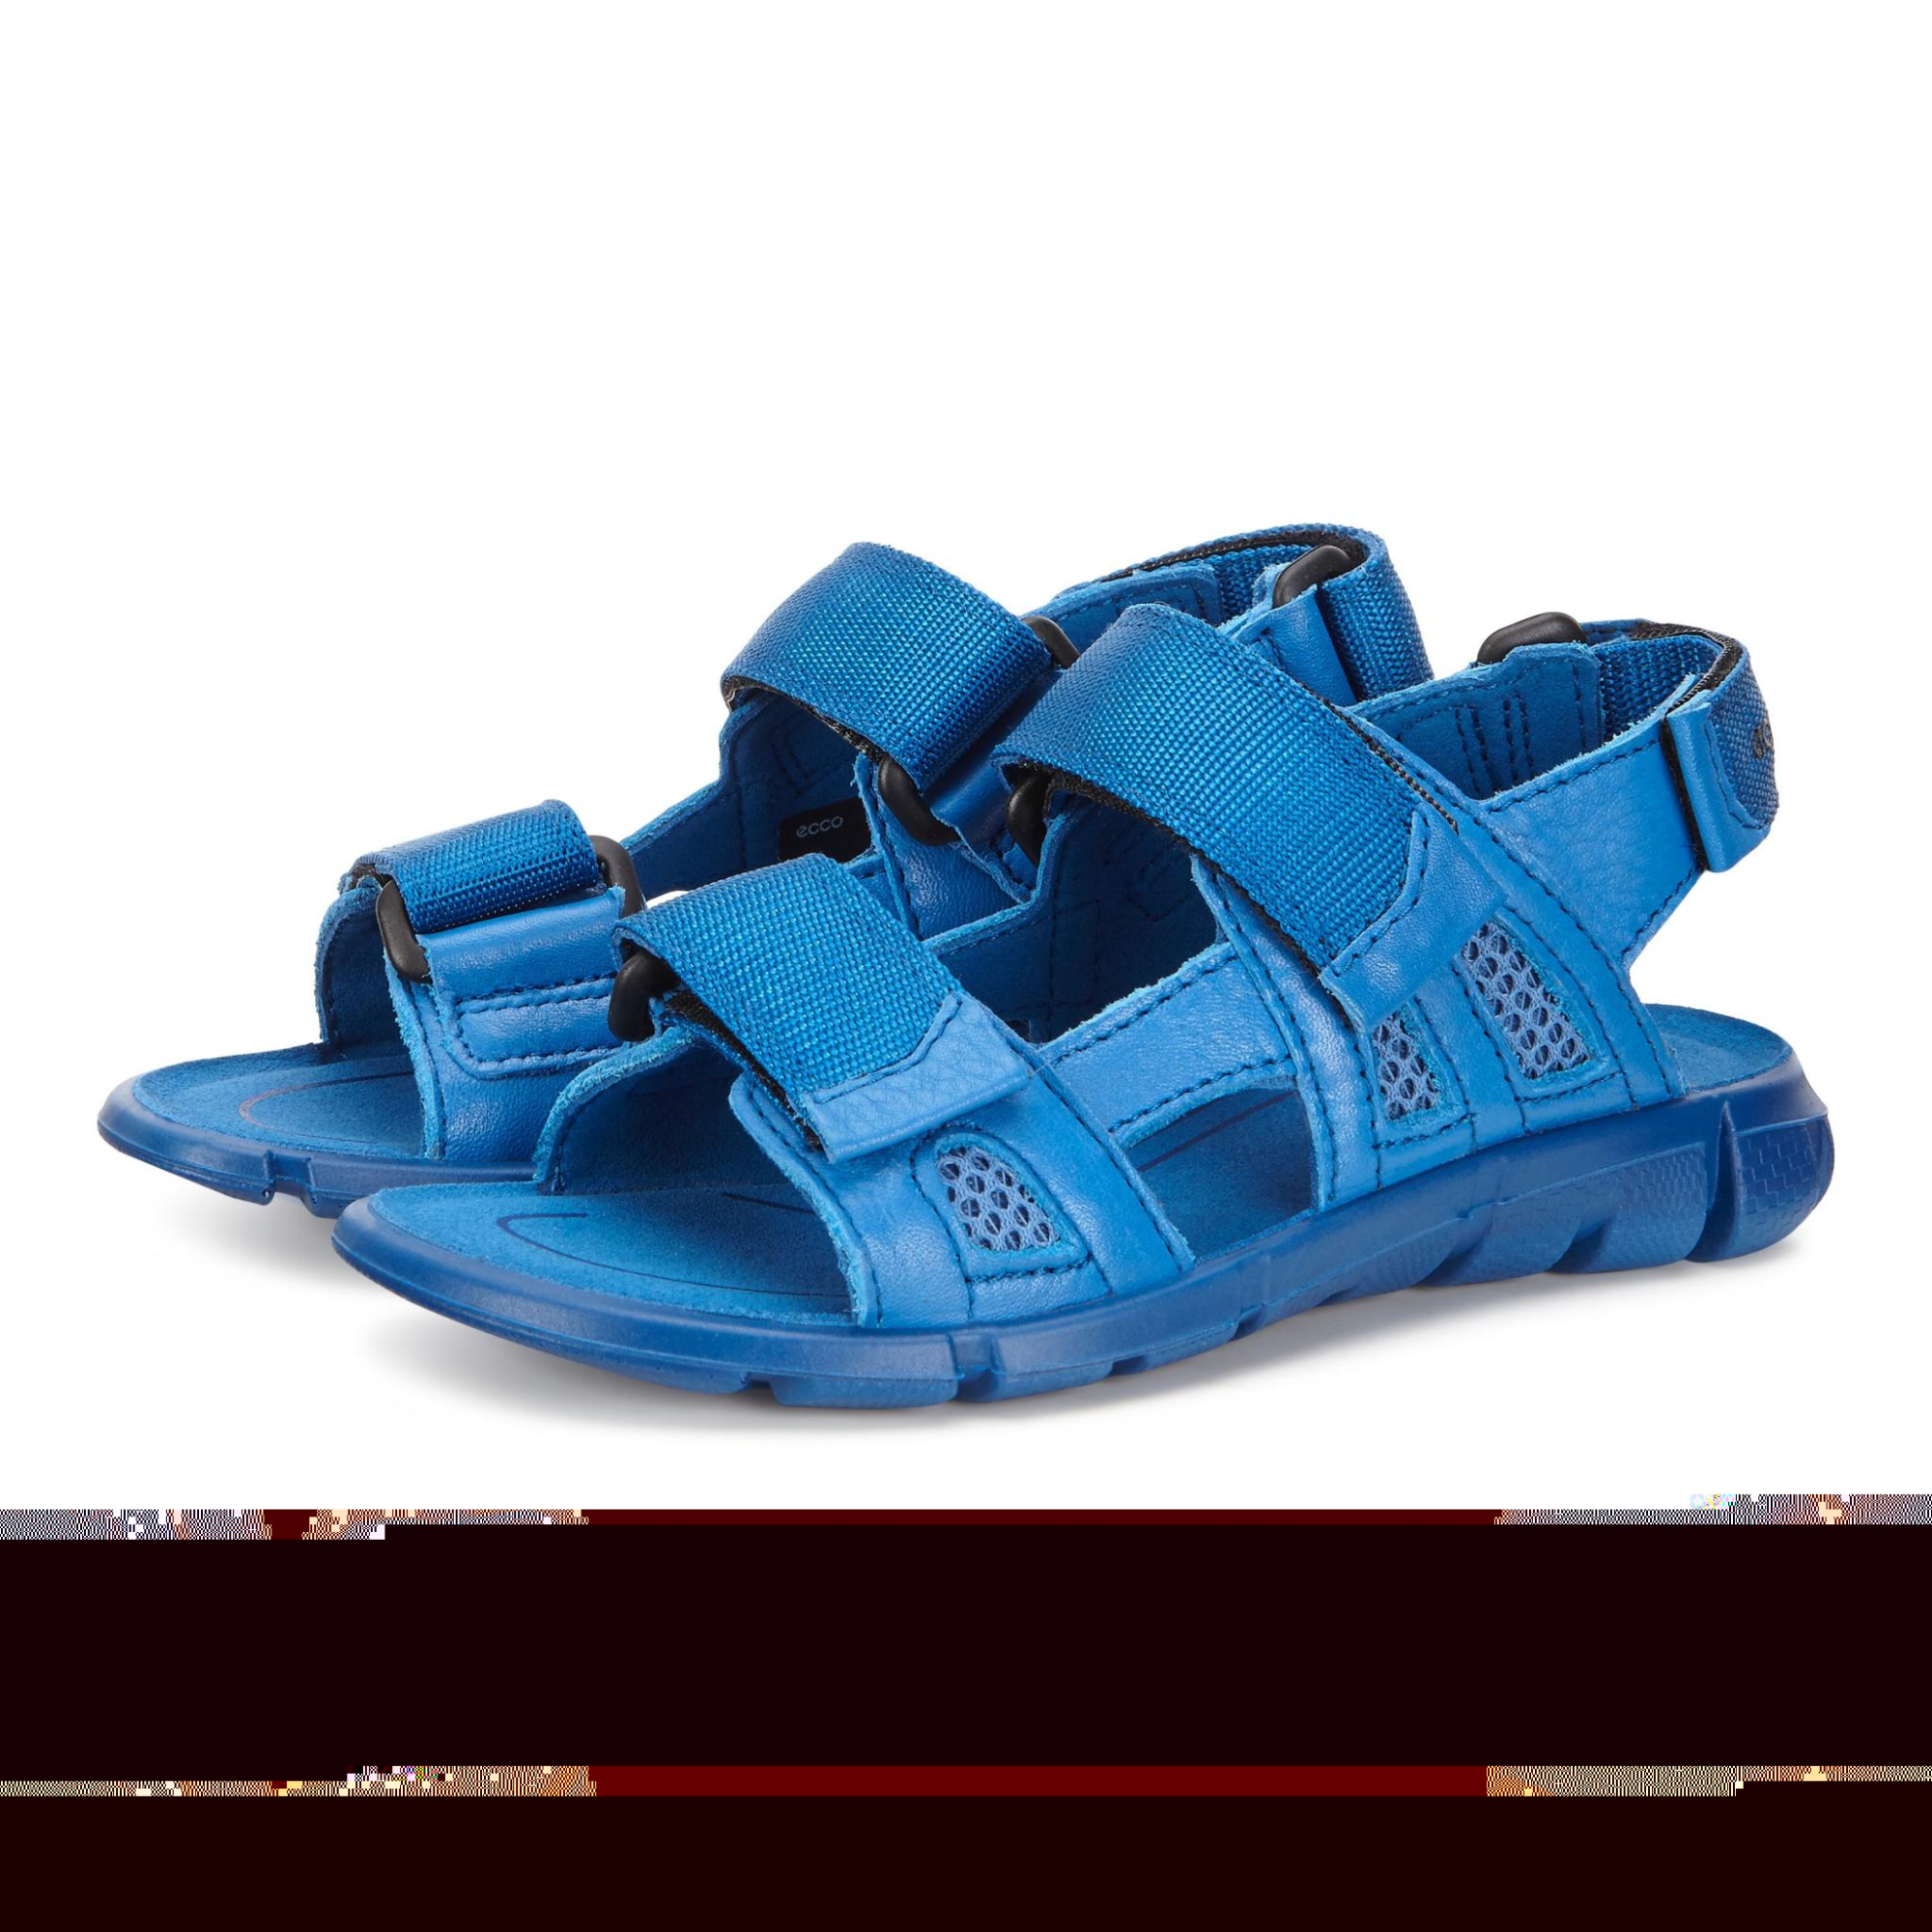 INTRINSIC SANDAL KIDS Fla 30 - Products - Veryk Mall Mall, many product, quick response, safe your money!